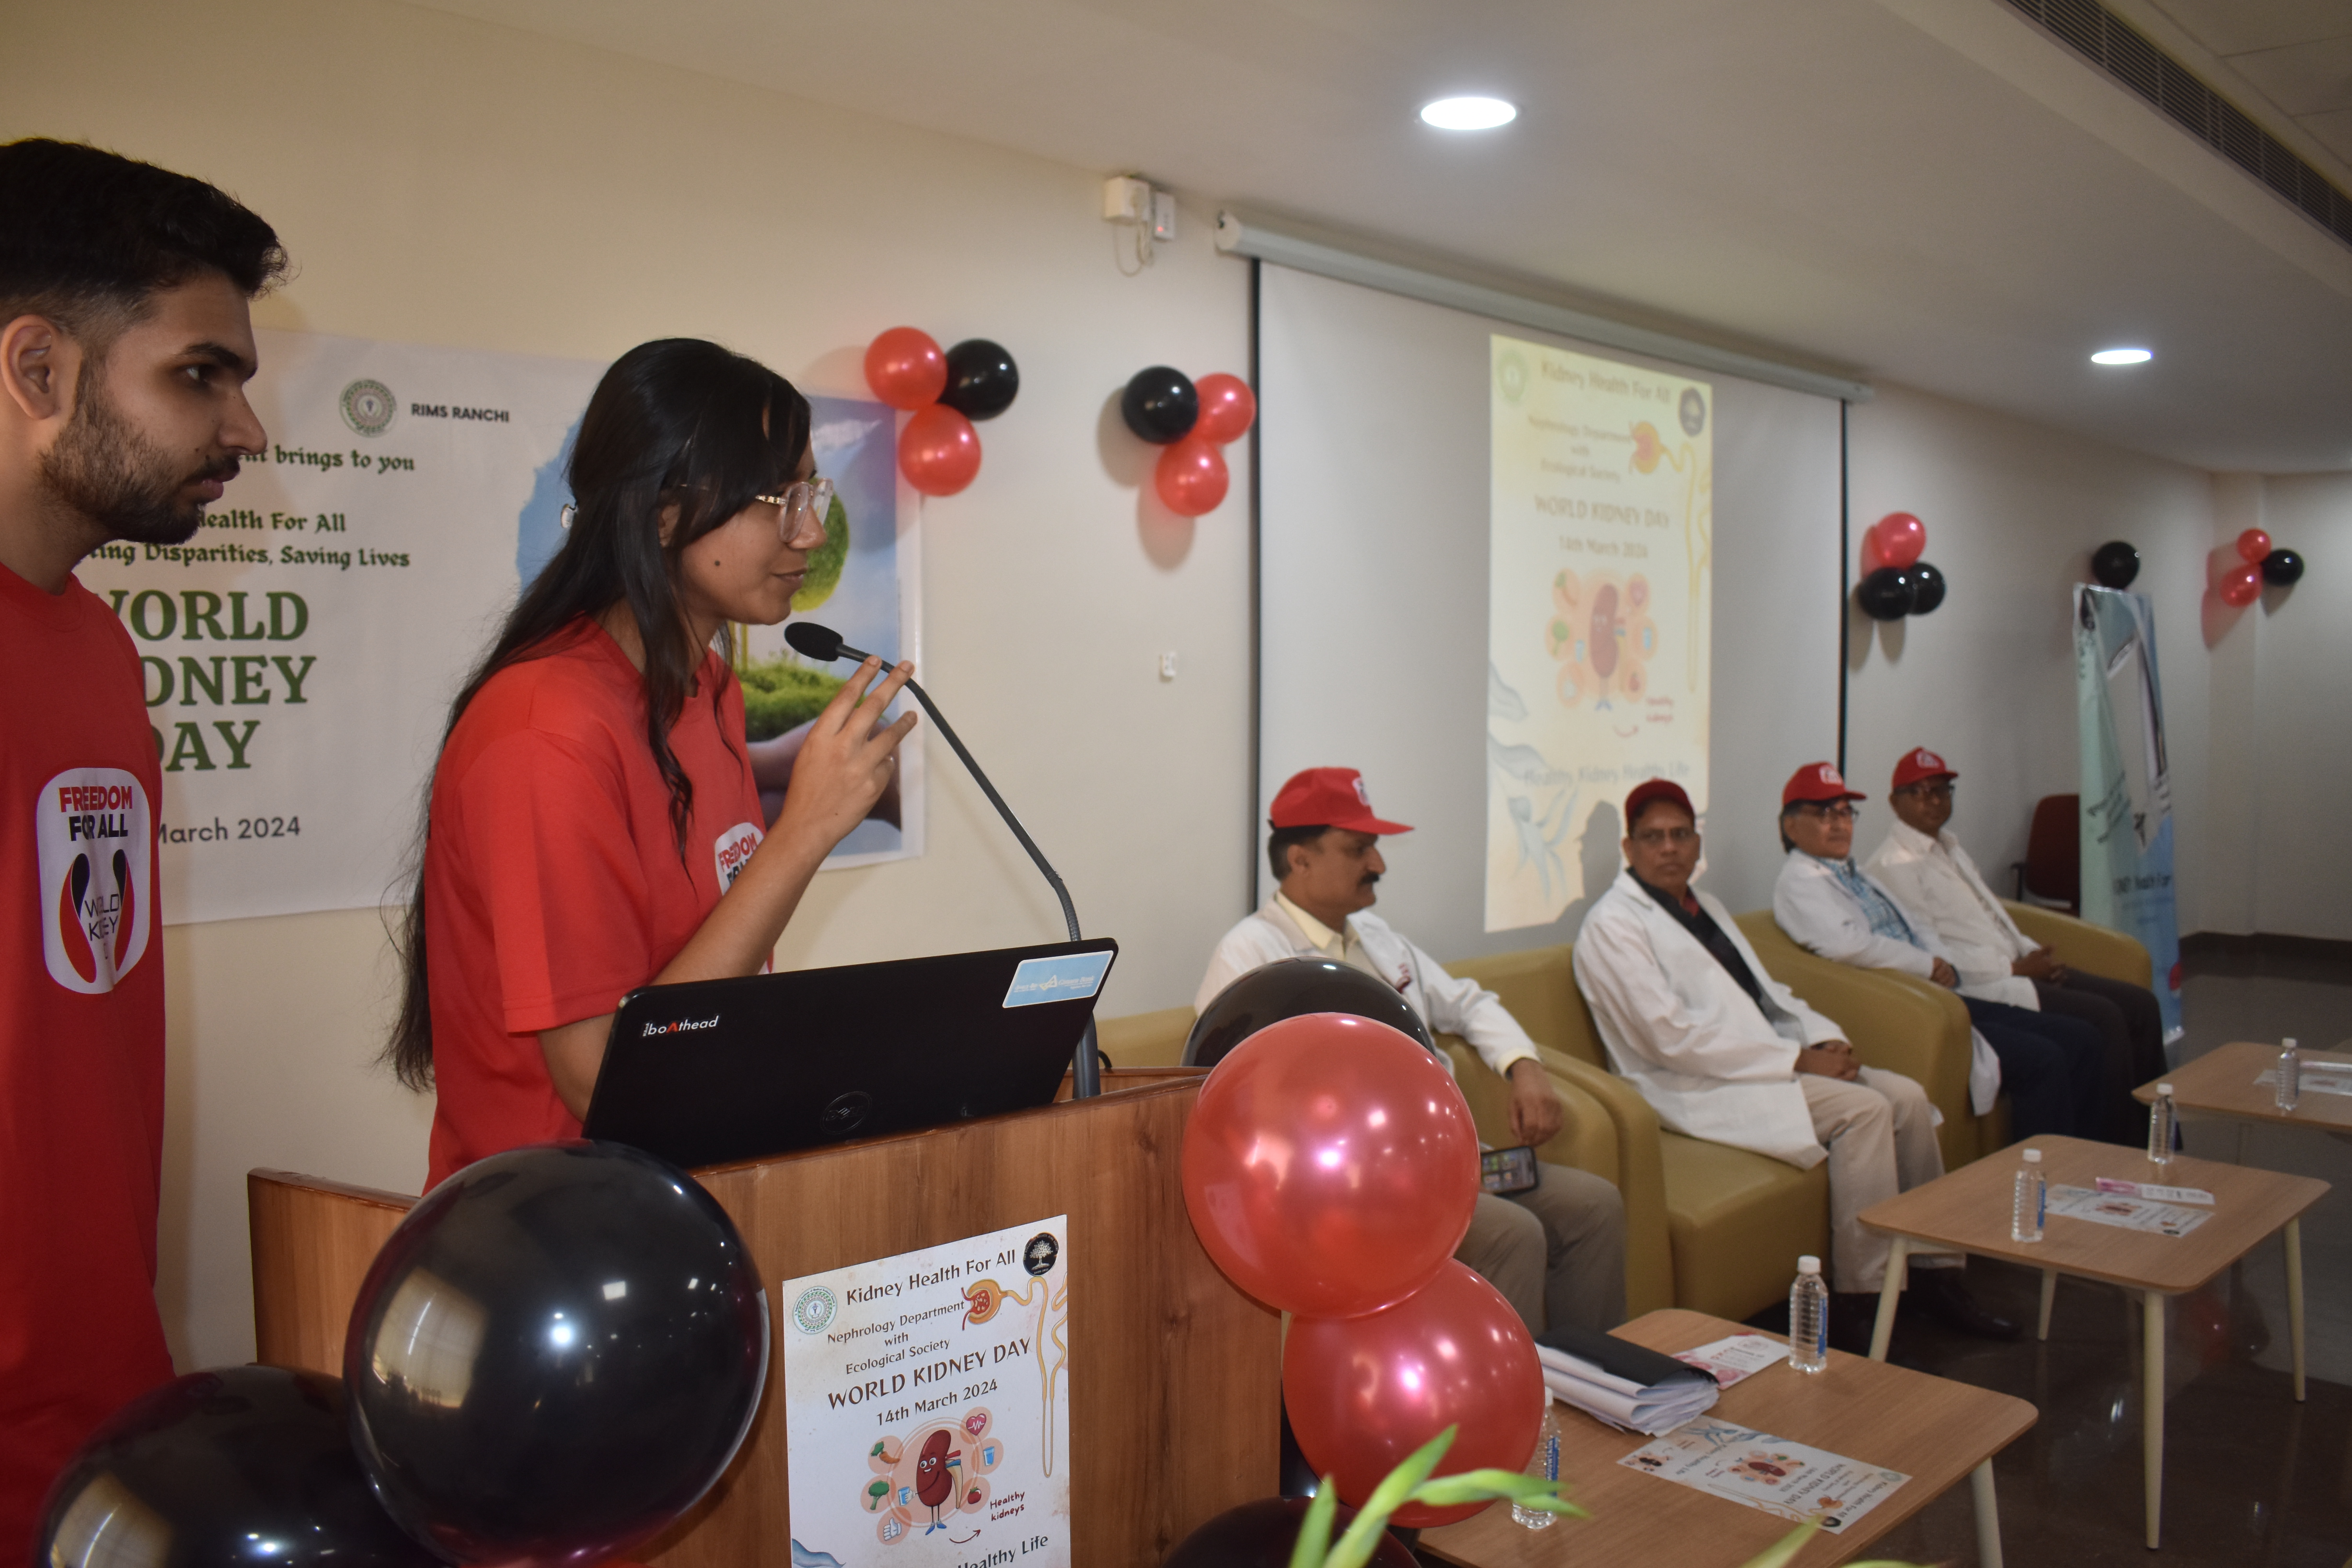 Celebration of World Kidney Day in RIMS Ranchi organized by Department of Nephrology in association with the Ecological Society, RIMS || Dated: 14/03/2024.